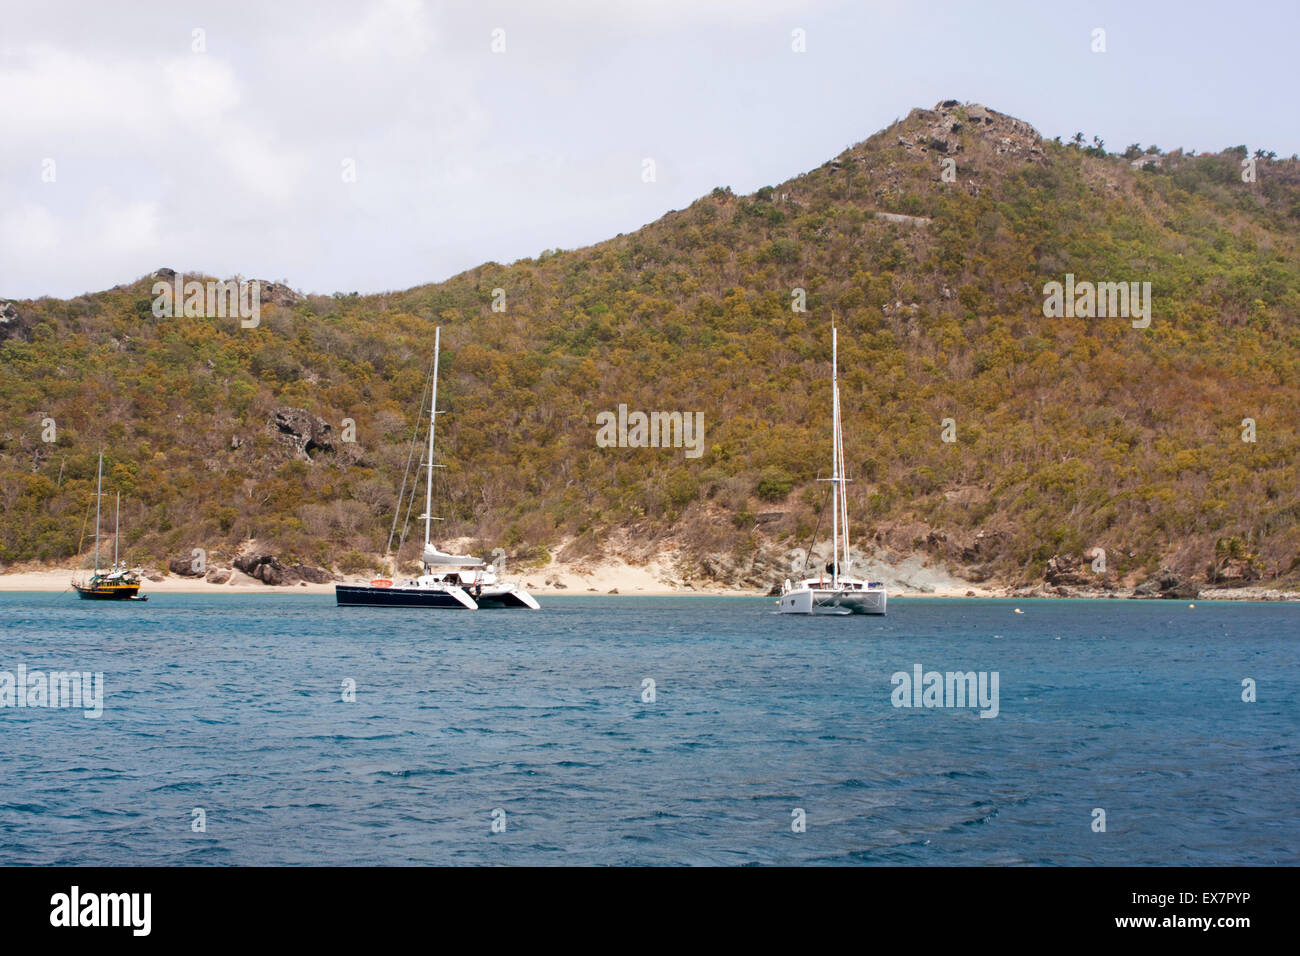 Colombier Beach, St. Barts with luxury sailboats in the foreground Stock Photo